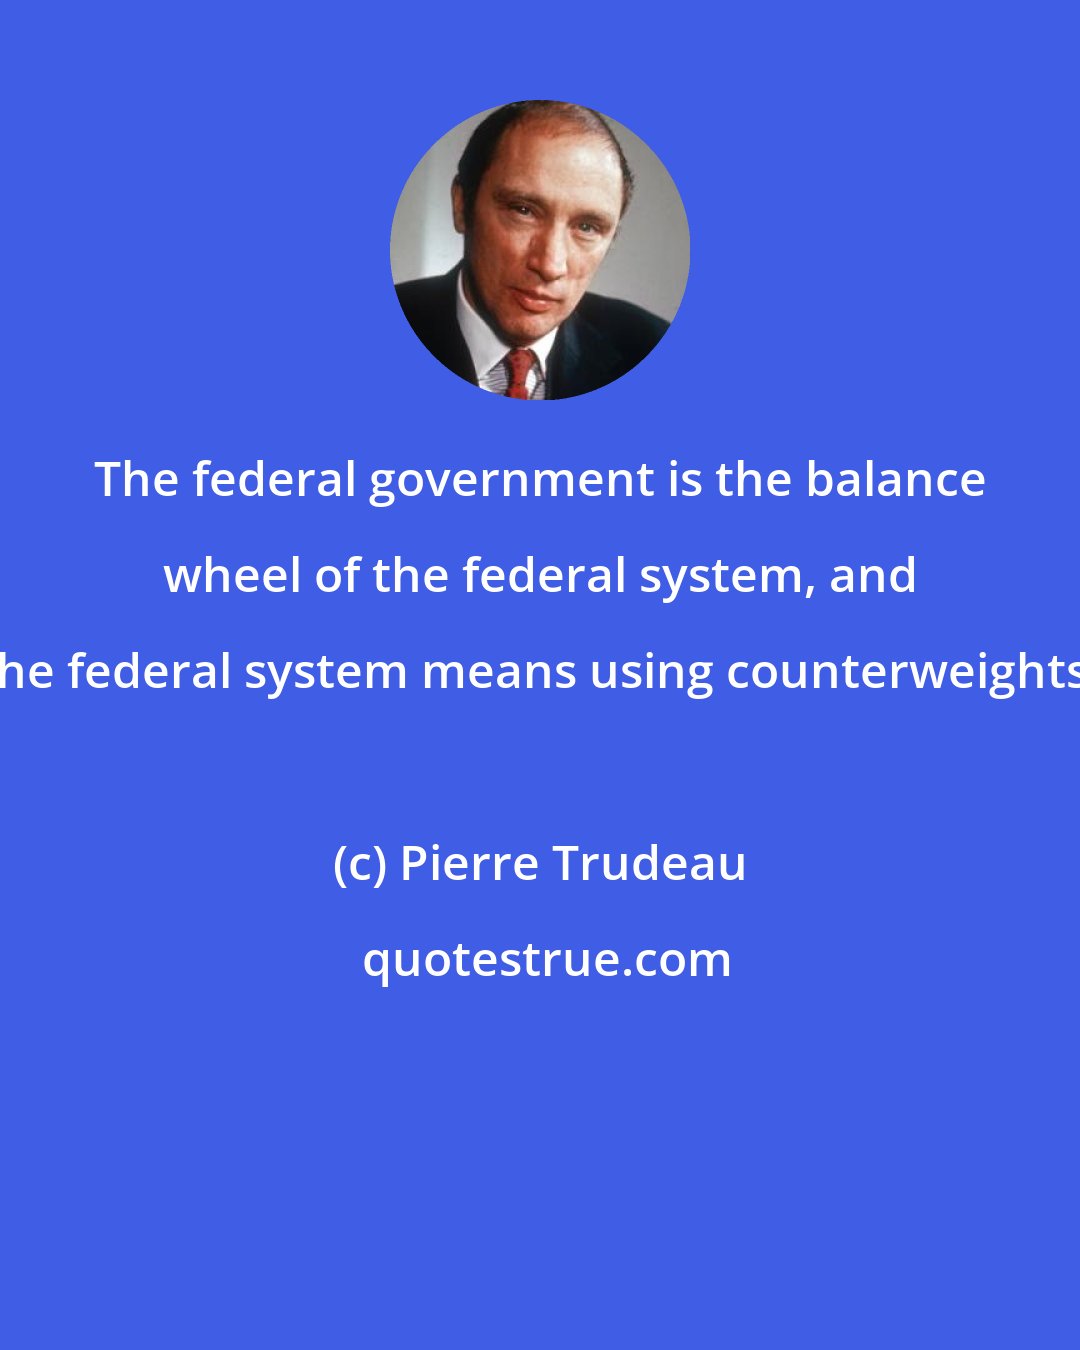 Pierre Trudeau: The federal government is the balance wheel of the federal system, and the federal system means using counterweights.